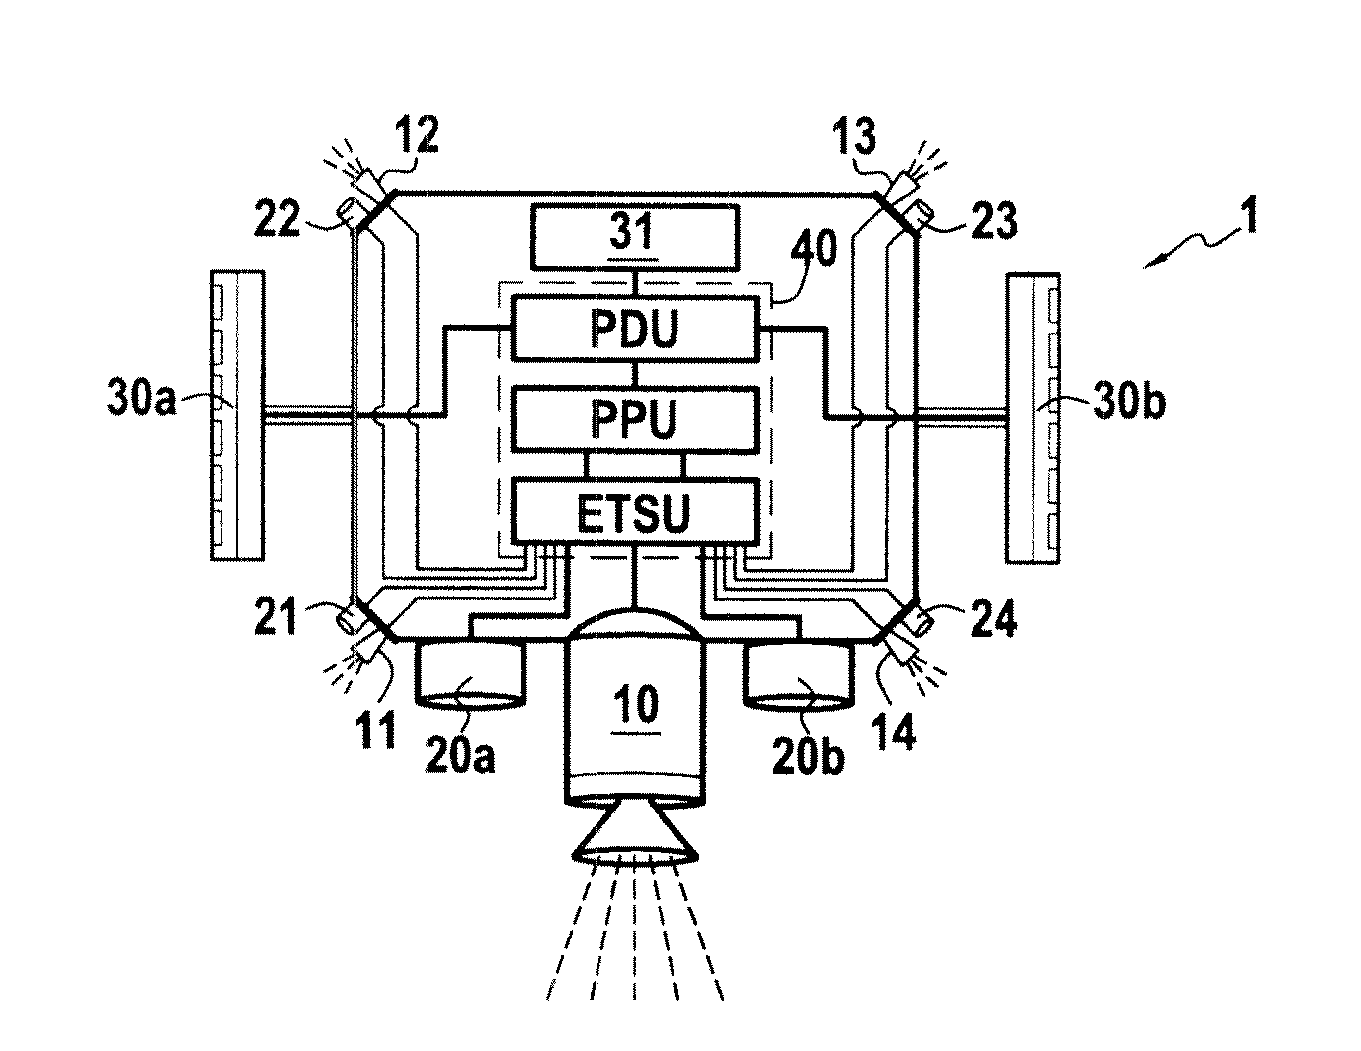 Space vehicle with electric propulsion and solid propellant chemical propulsion